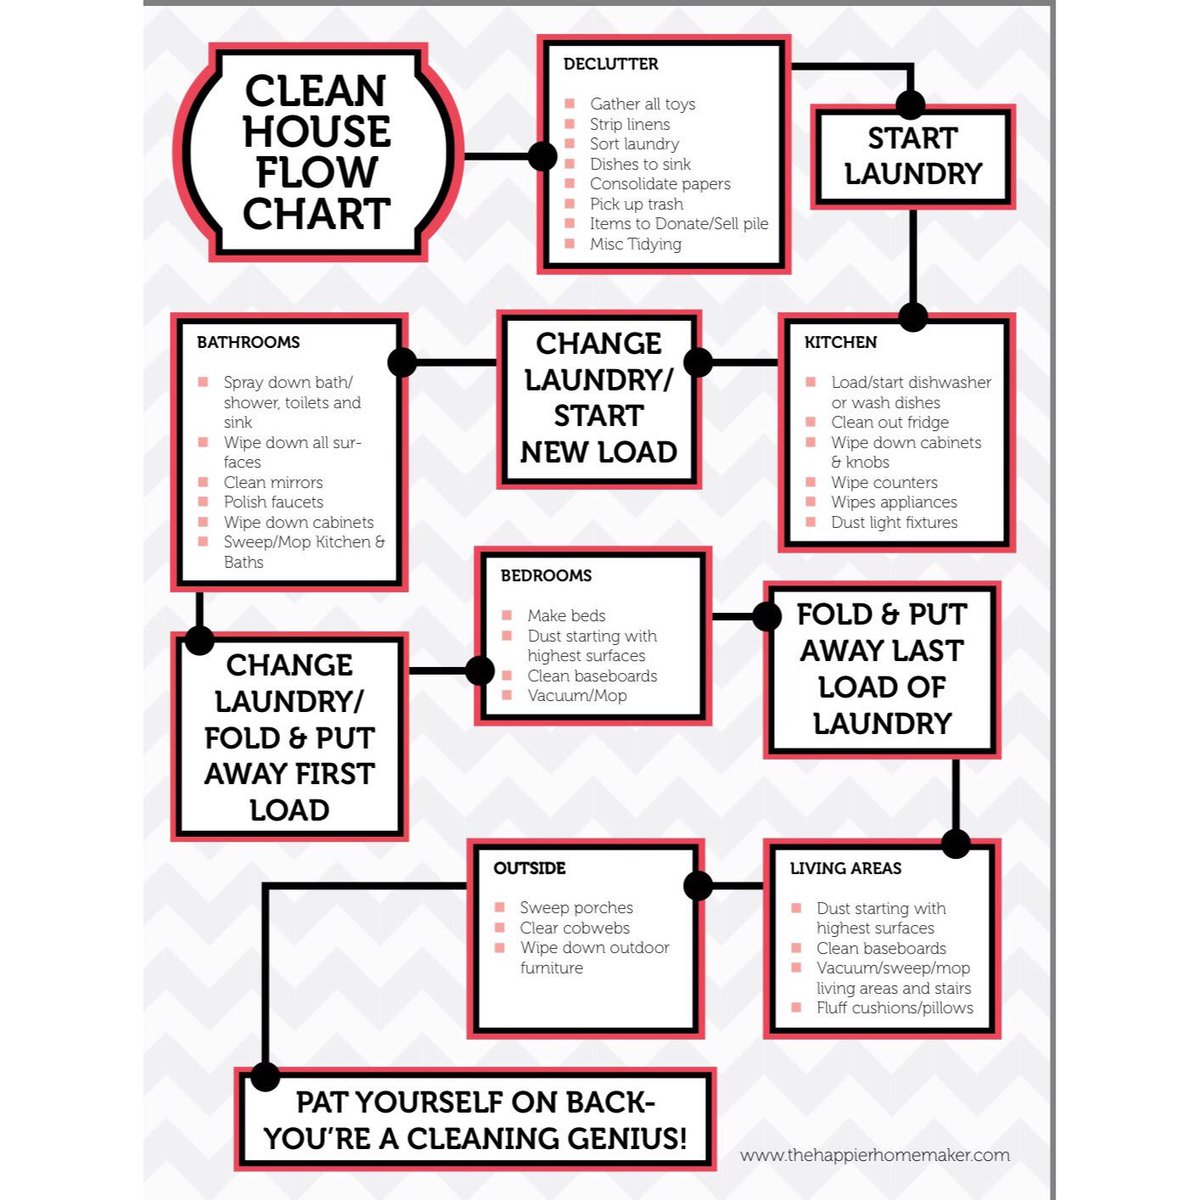 Clean House Flow Chart